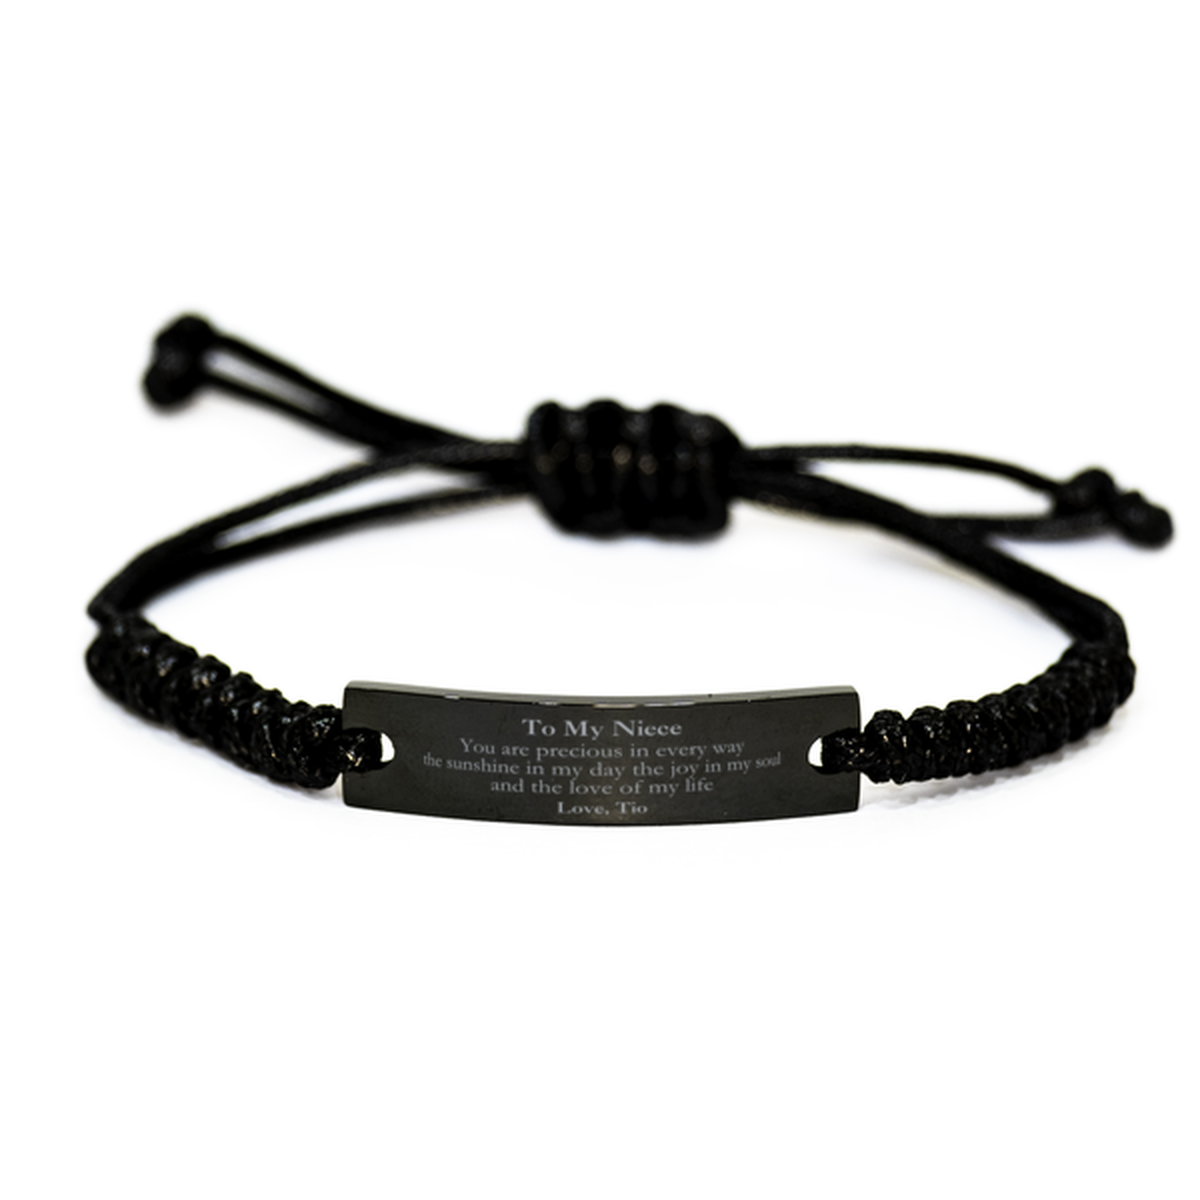 Graduation Gifts for Niece Black Rope Bracelet Present from Tio, Christmas Niece Birthday Gifts Niece You are precious in every way the sunshine in my day. Love, Tio